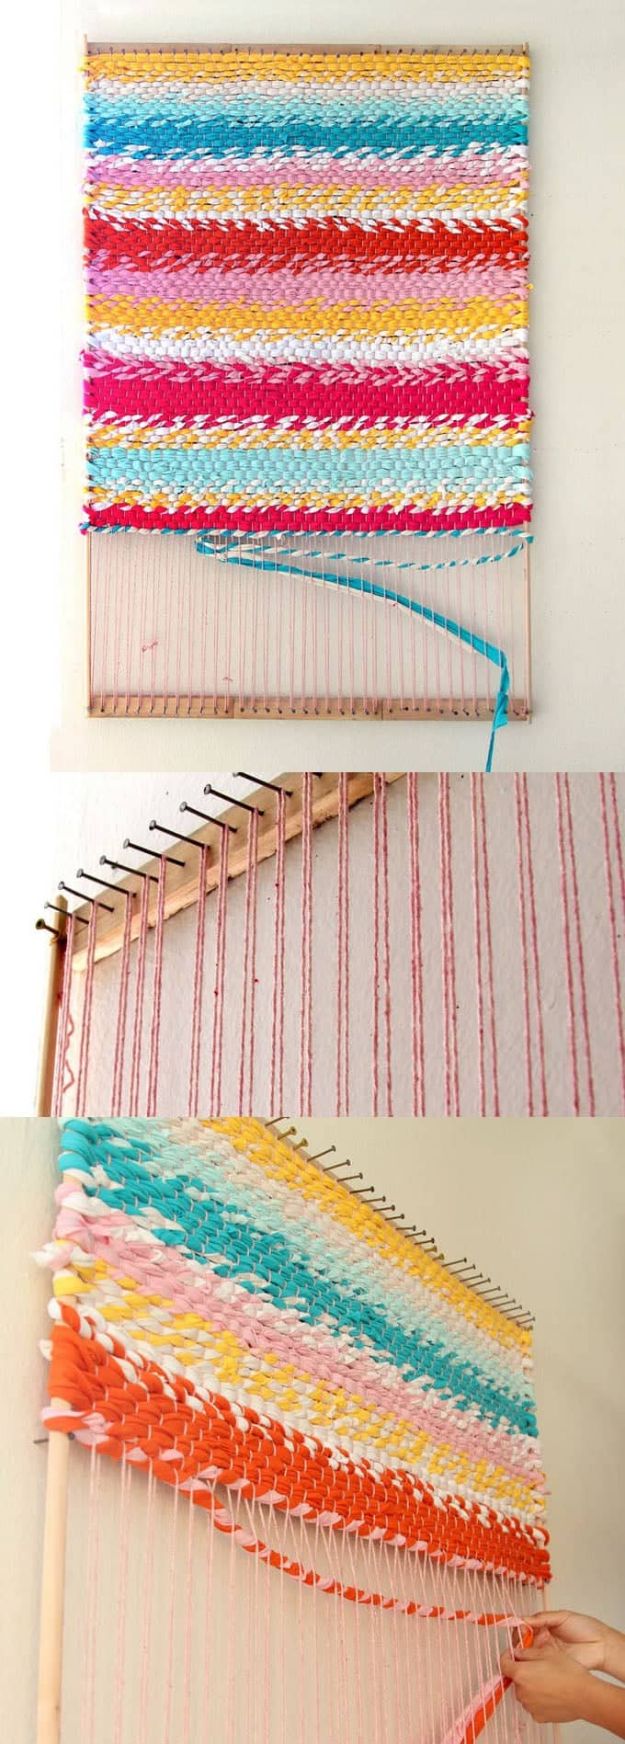 DIY Rugs - Weave A T-Shirt Rug With Easy DIY Loom - Ideas for An Easy Handmade Rug for Living Room, Bedroom, Kitchen Mat and Cheap Area Rugs You Can Make - Stencil Art Tutorial, Painting Tips, Fabric, Yarn, Old Denim Jeans, Rope, Tshirt, Pom Pom, Fur, Crochet, Woven and Outdoor Projects - Large and Small Carpet #diyrugs #diyhomedecor